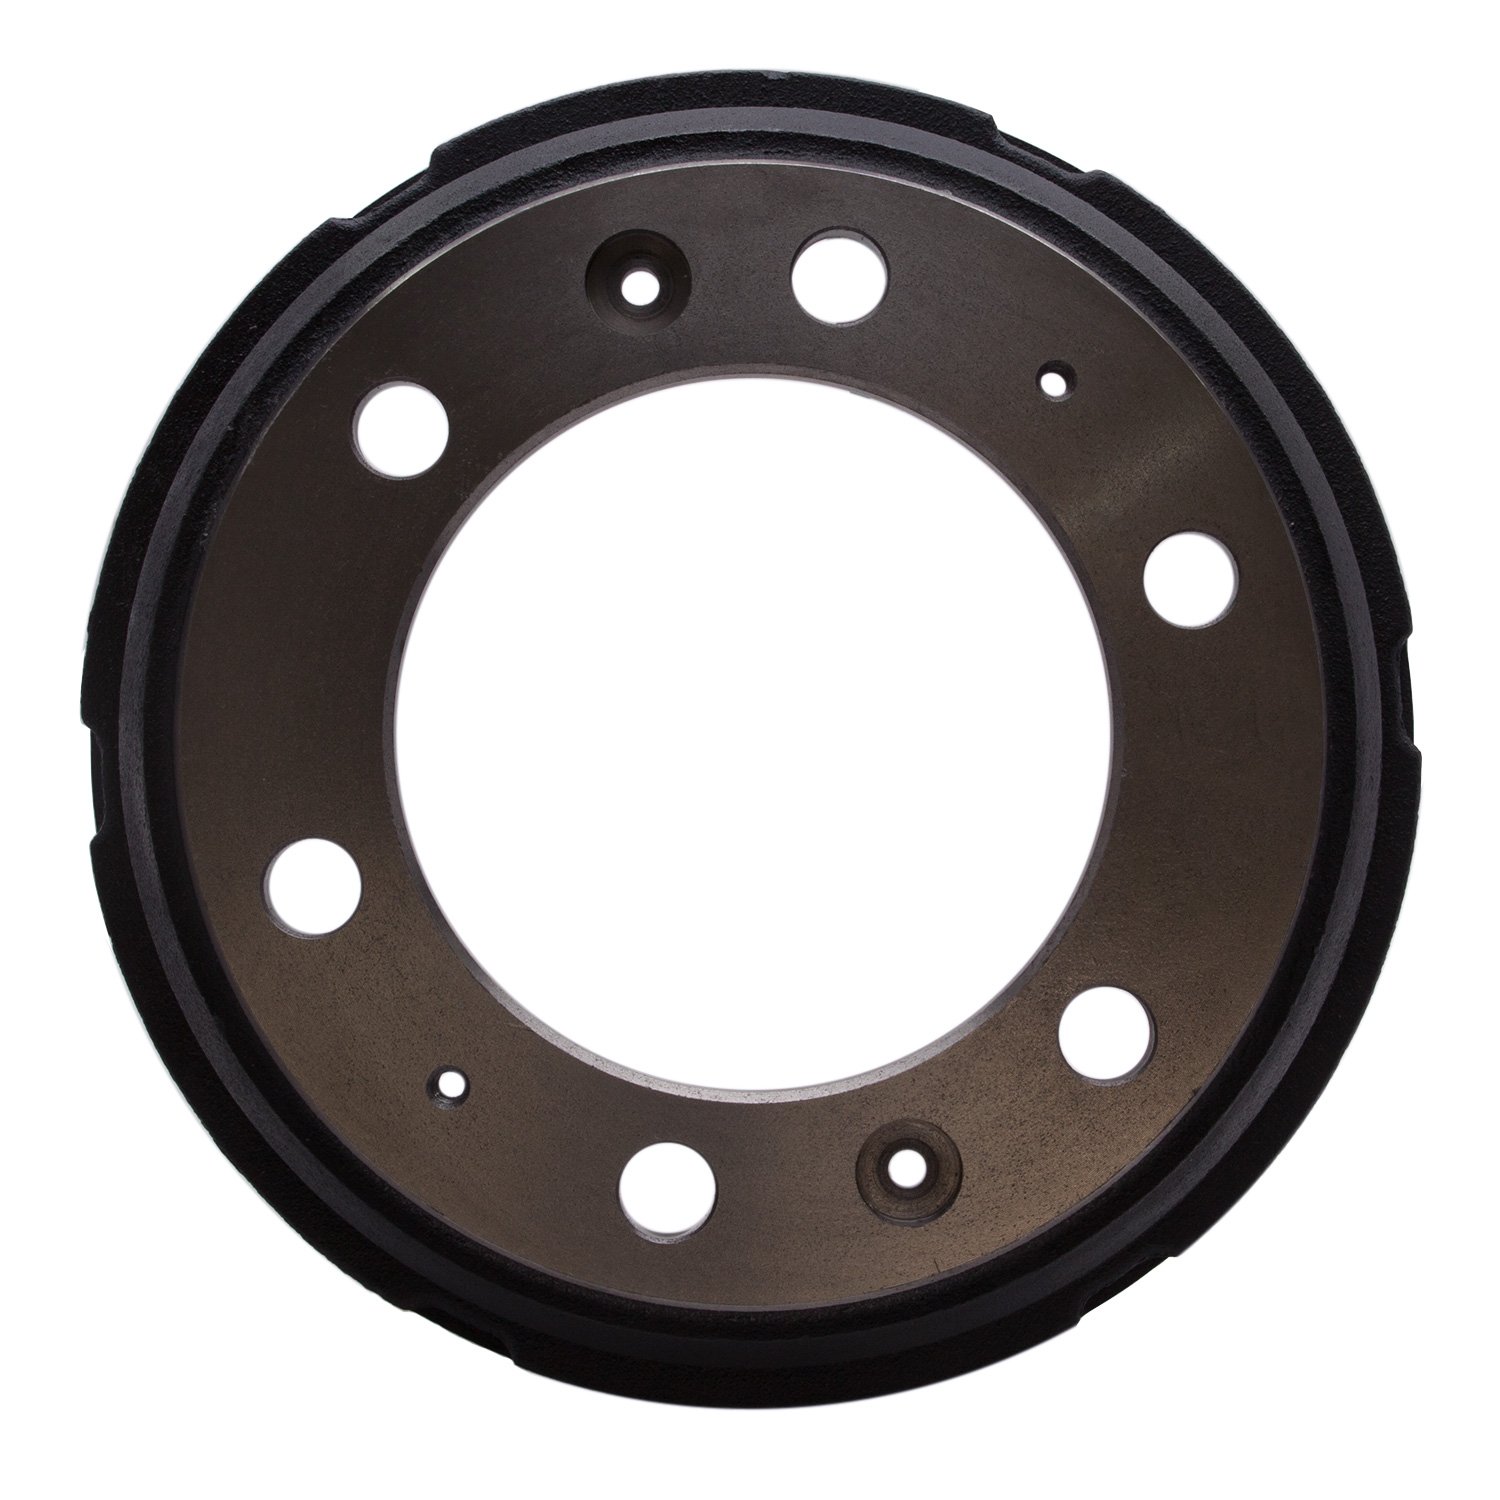 Brake Drum, Fits Select GM, Position: Rear & Front